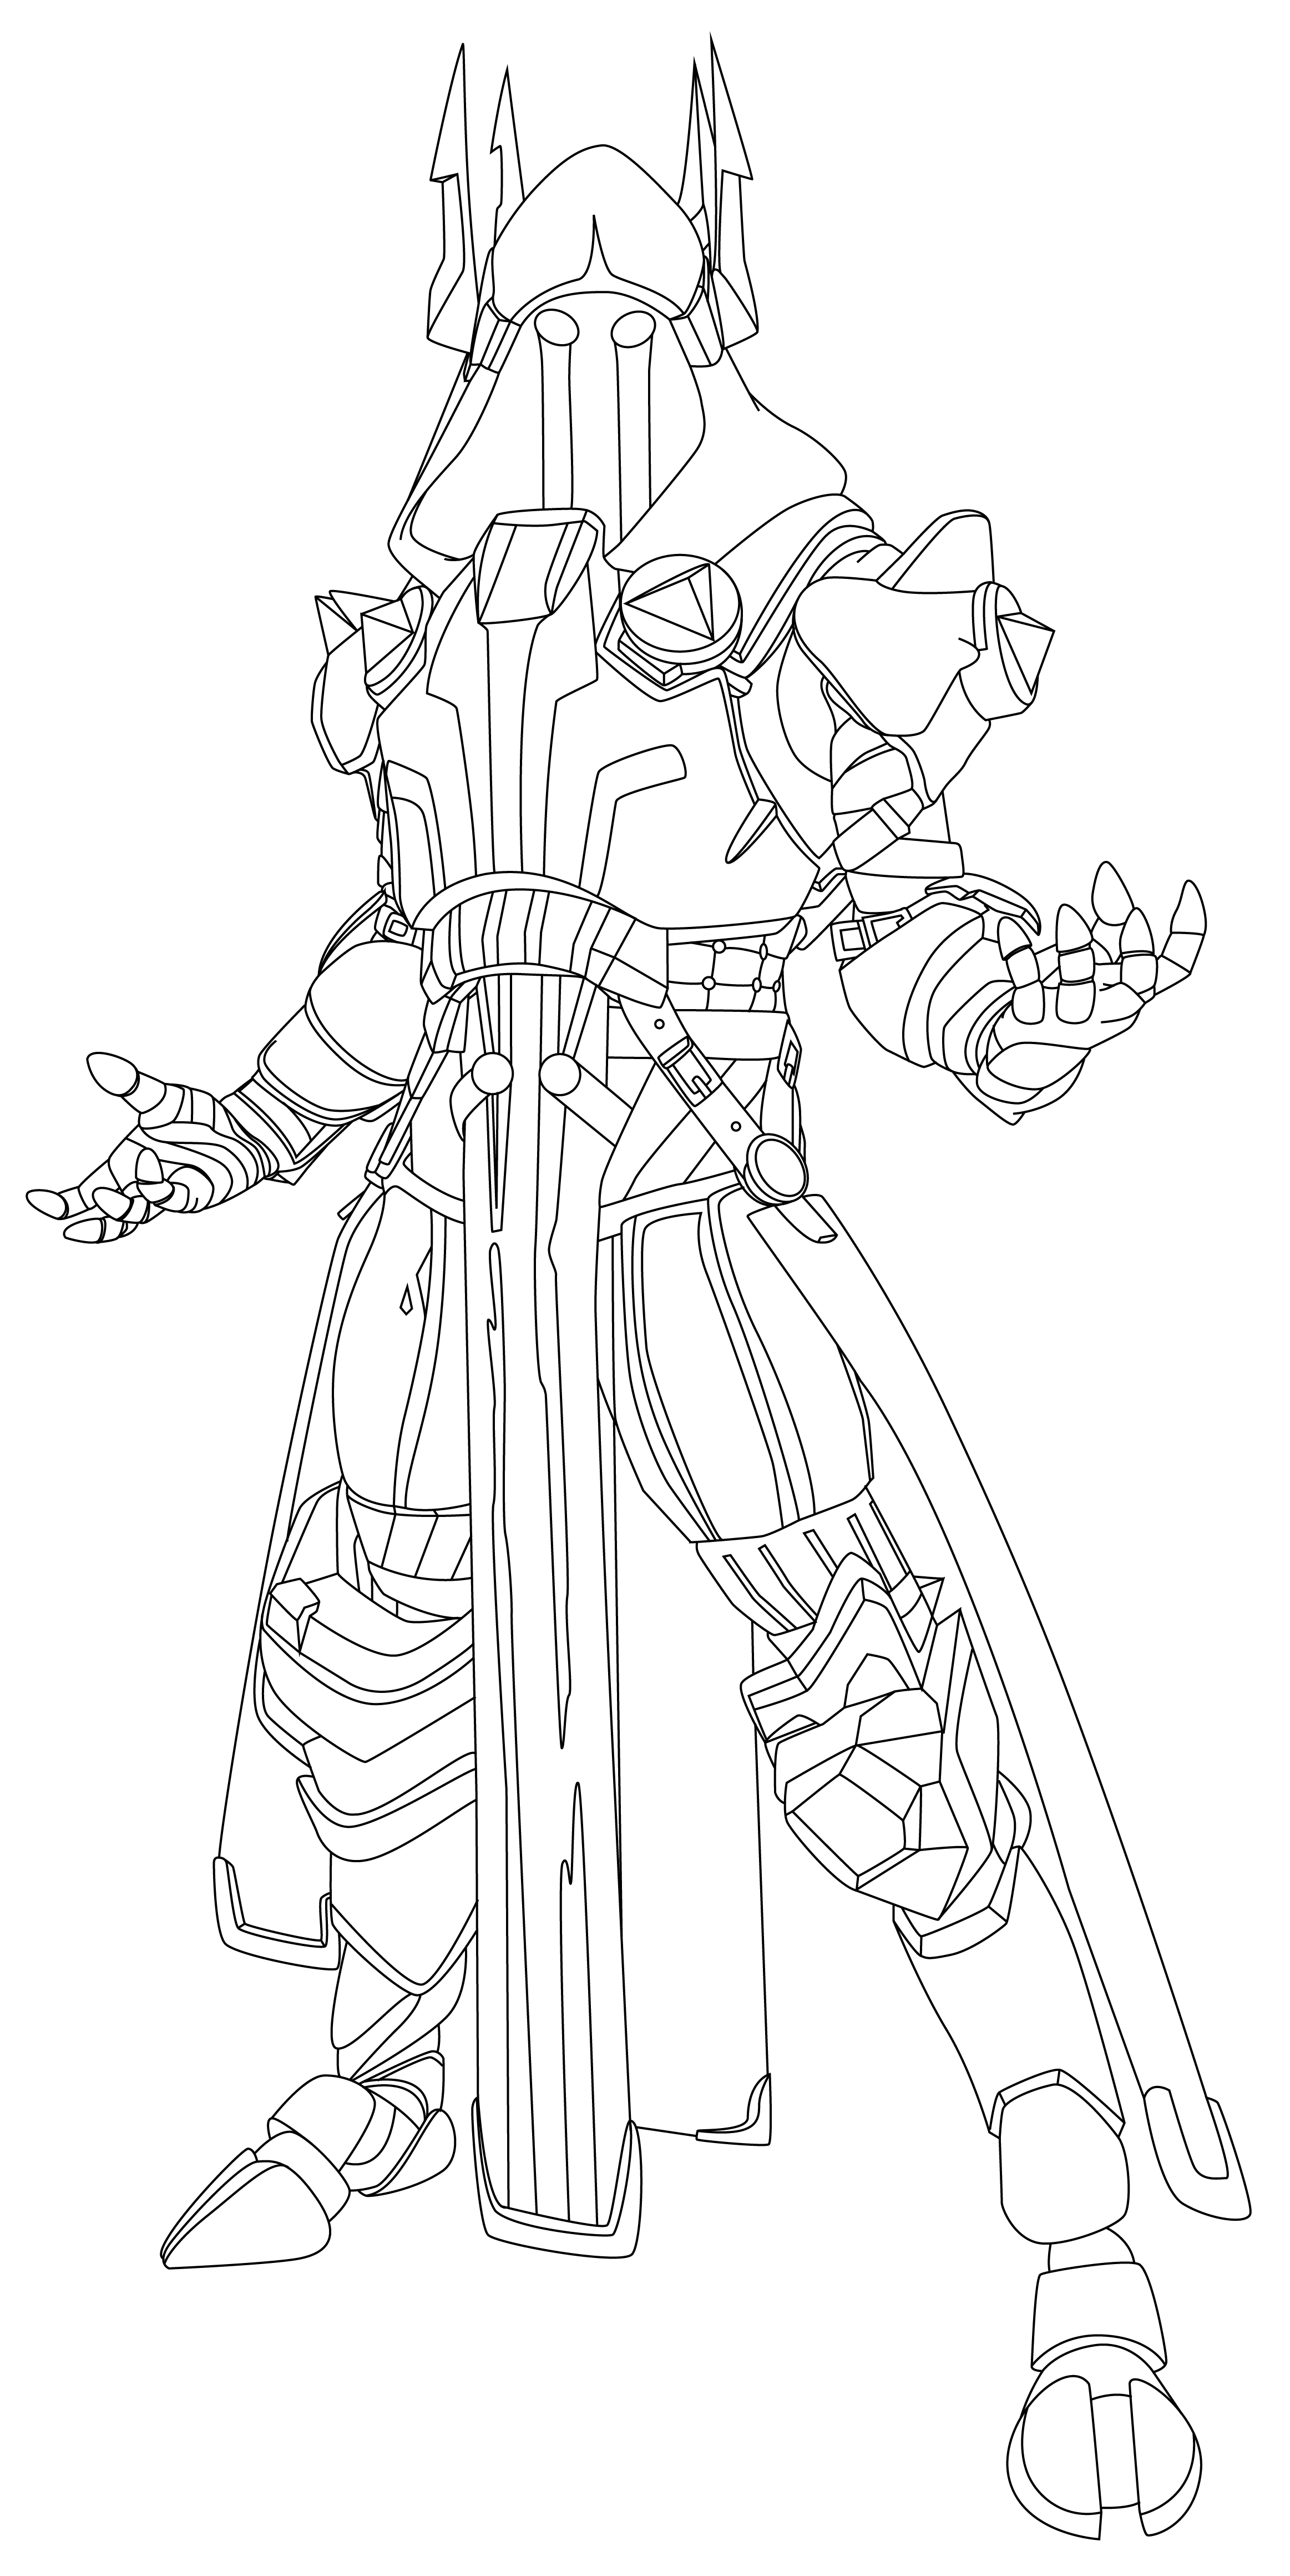 Ice King Fortnite Skin Hd Coloring Page